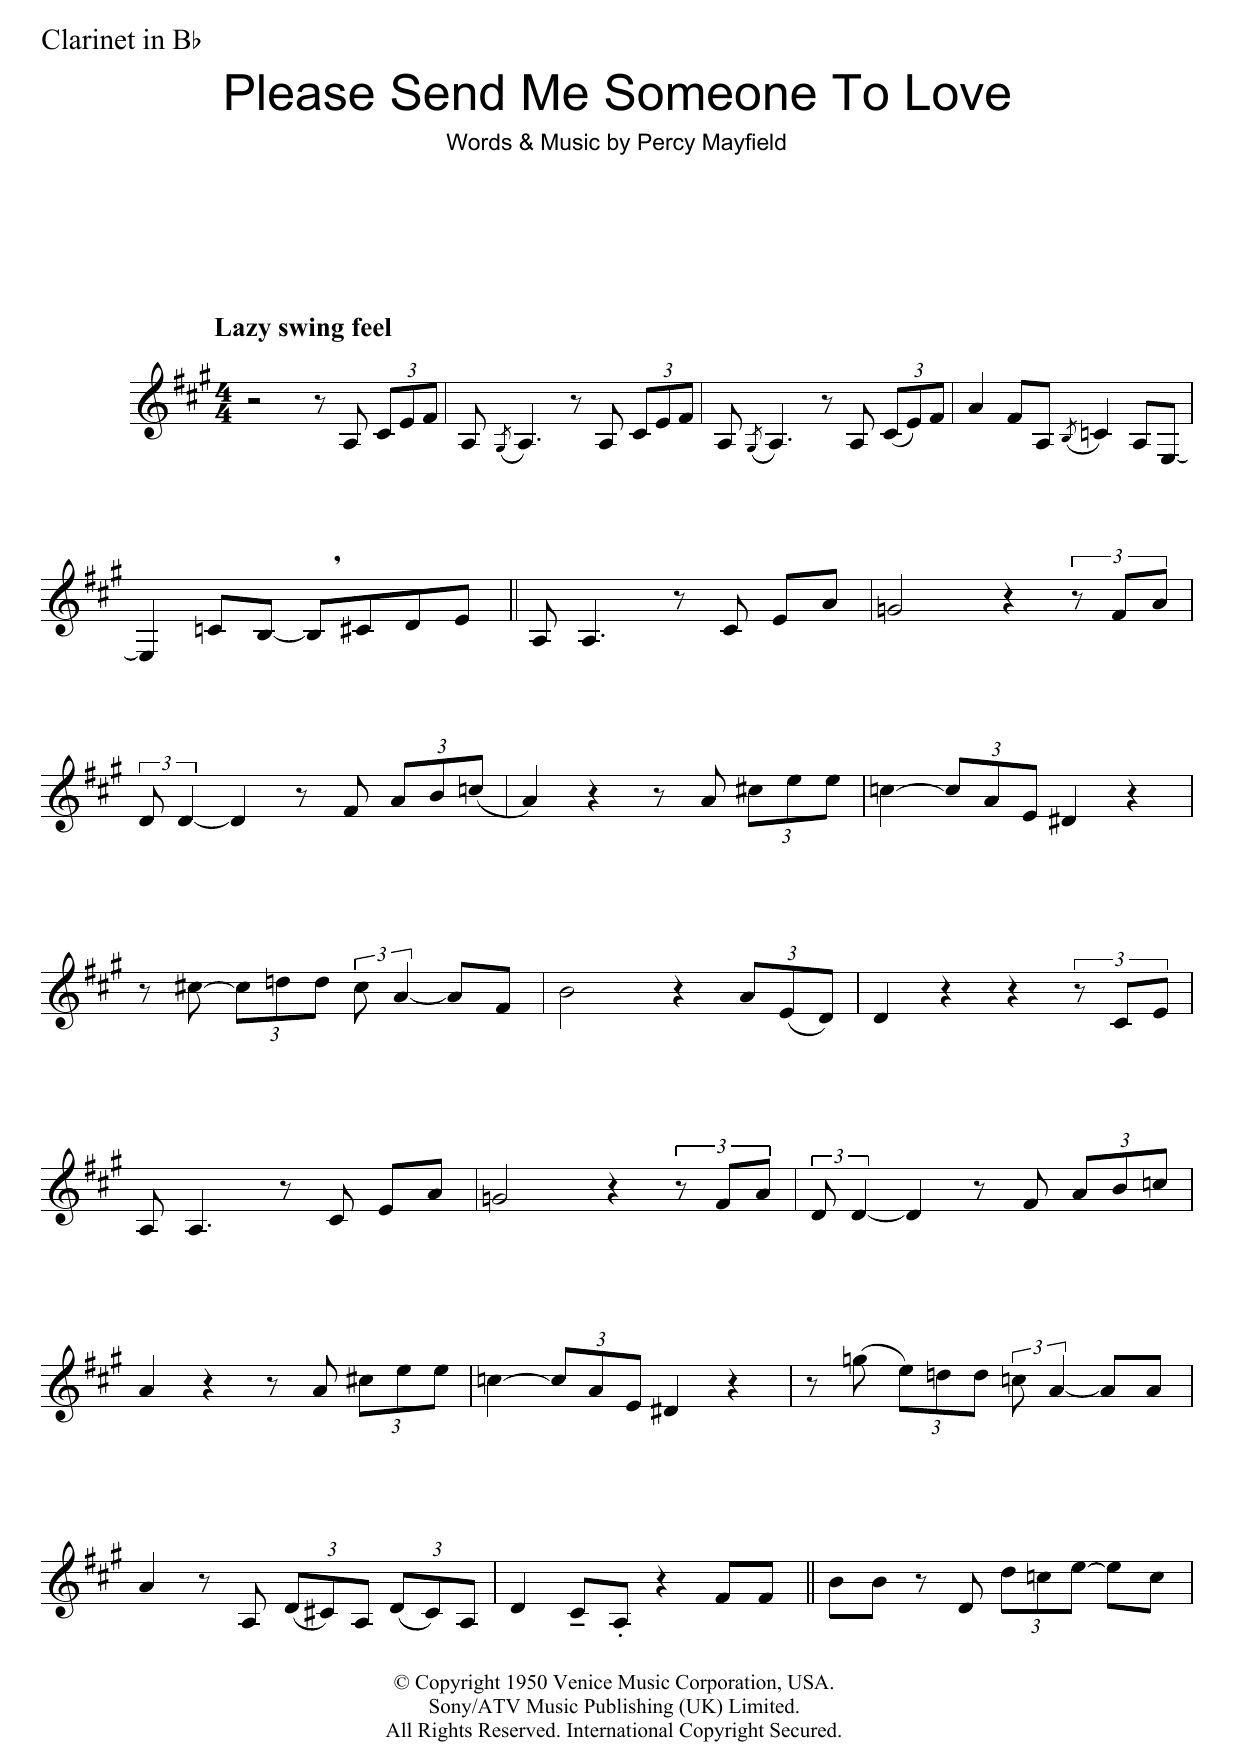 Download Percy Mayfield Please Send Me Someone To Love Sheet Music